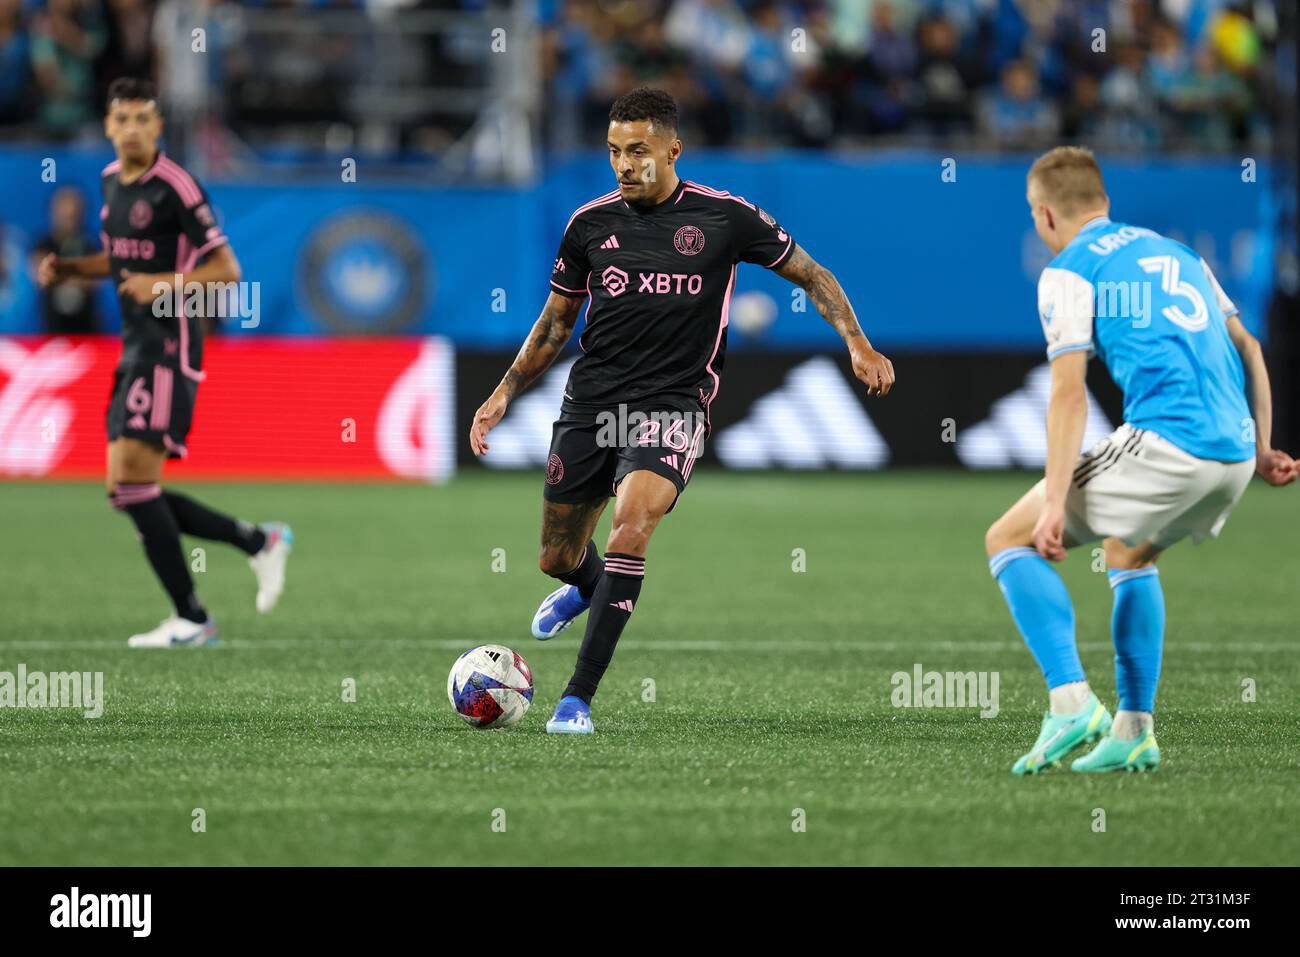 Charlotte, North Carolina, USA. 21st Oct, 2023. Inter Miami midfielder Gregore (26) passes the ball during the MLS soccer match between Inter Miami CF and Charlotte FC at Bank of America Stadium in Charlotte, North Carolina. Greg Atkins/CSM/Alamy Live News Stock Photo